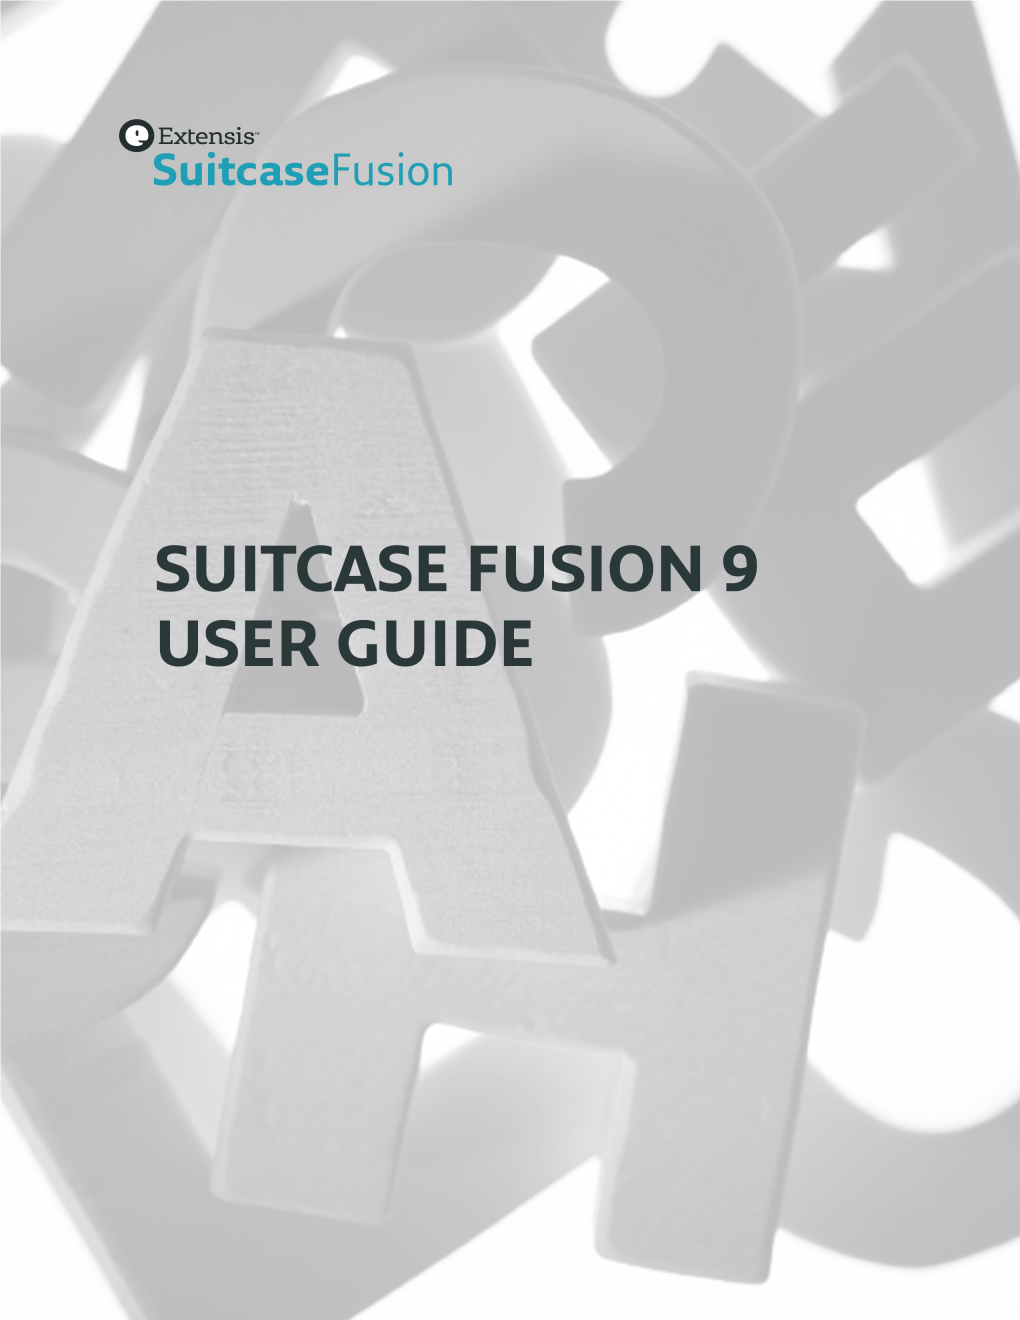 Suitcase Fusion 9 User Guide